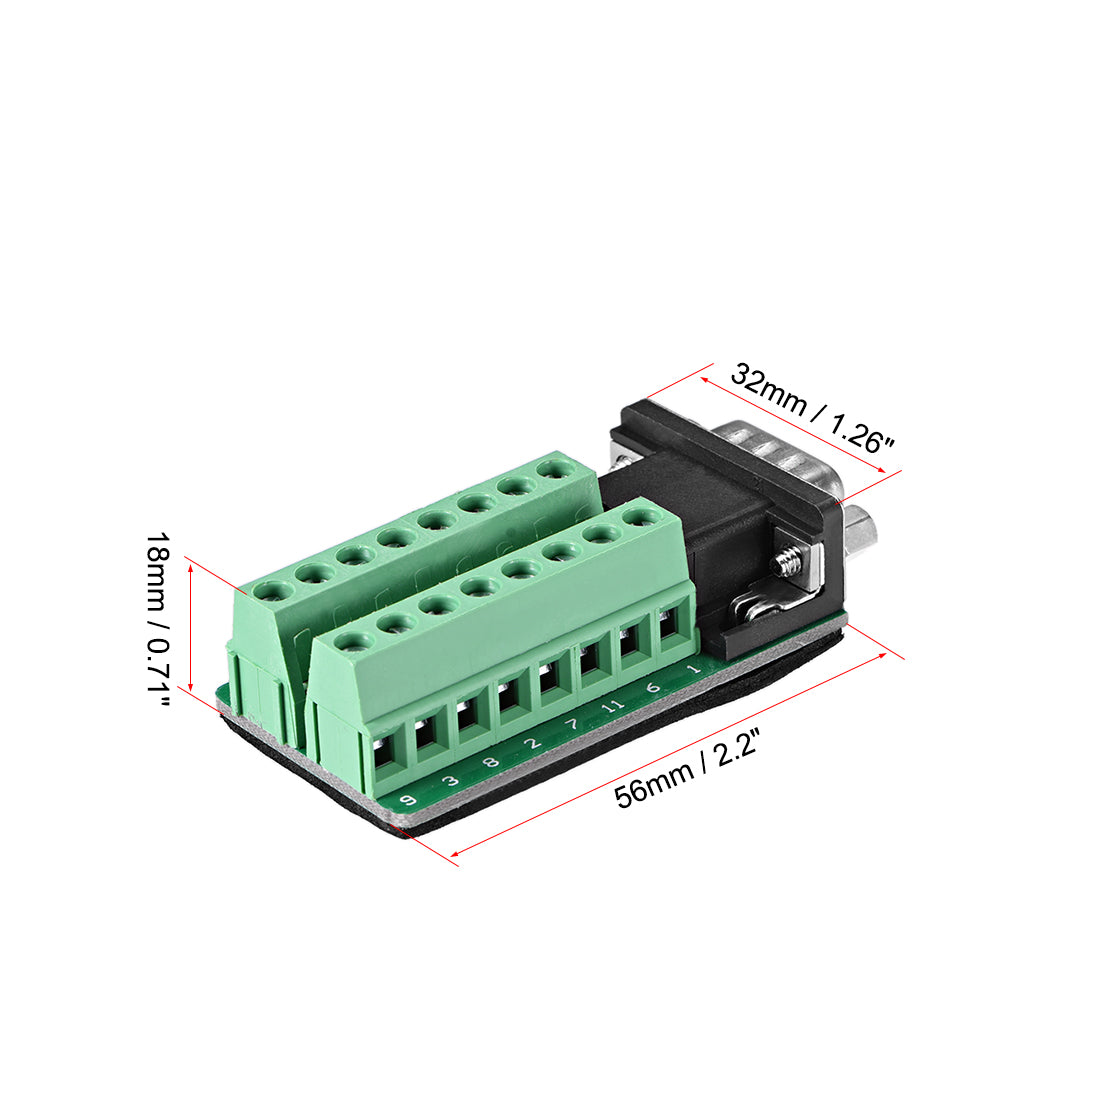 uxcell Uxcell D-sub DB15 Breakout Board Connector 15 Pin 3-row Male Port Solderless Terminal Block Adapter with Positioning Nuts